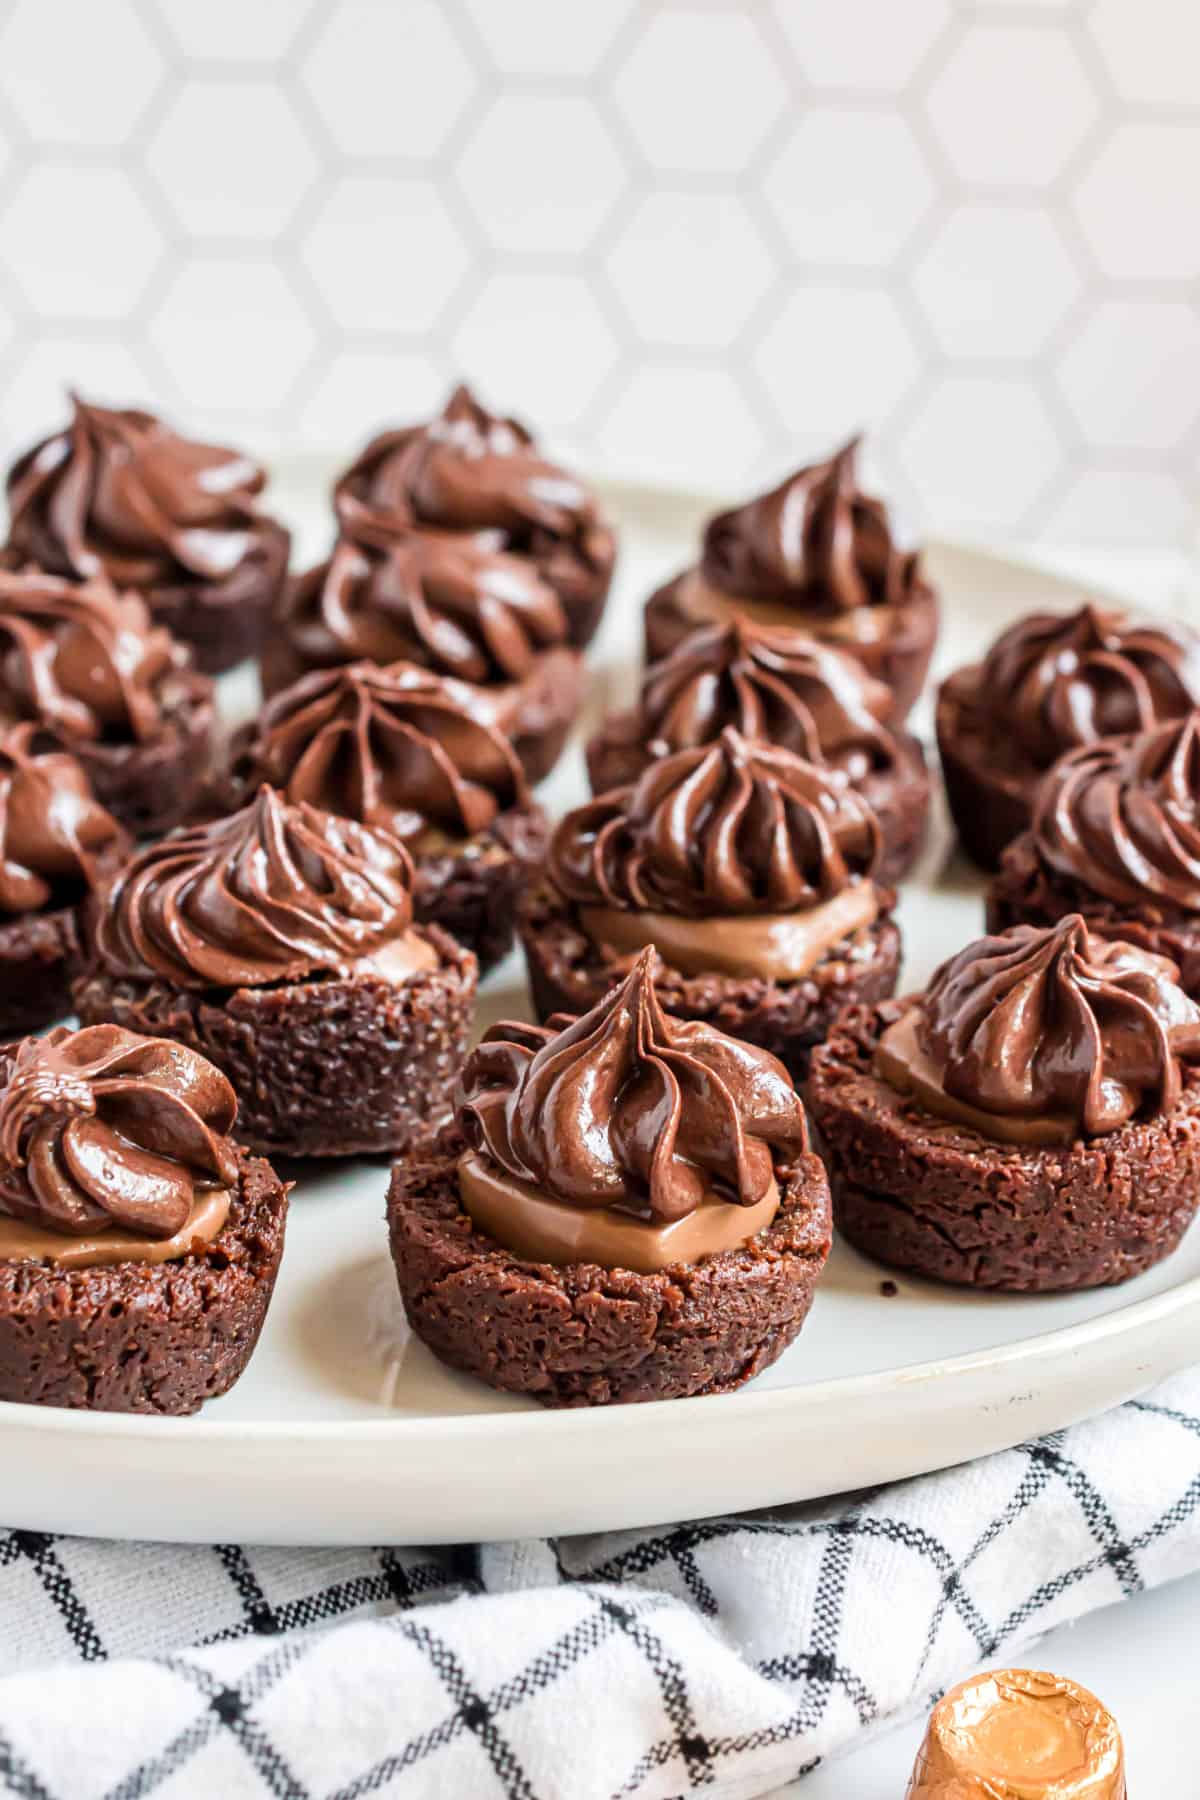 Chocolate caramel brownie bites on a cake platter to serve.